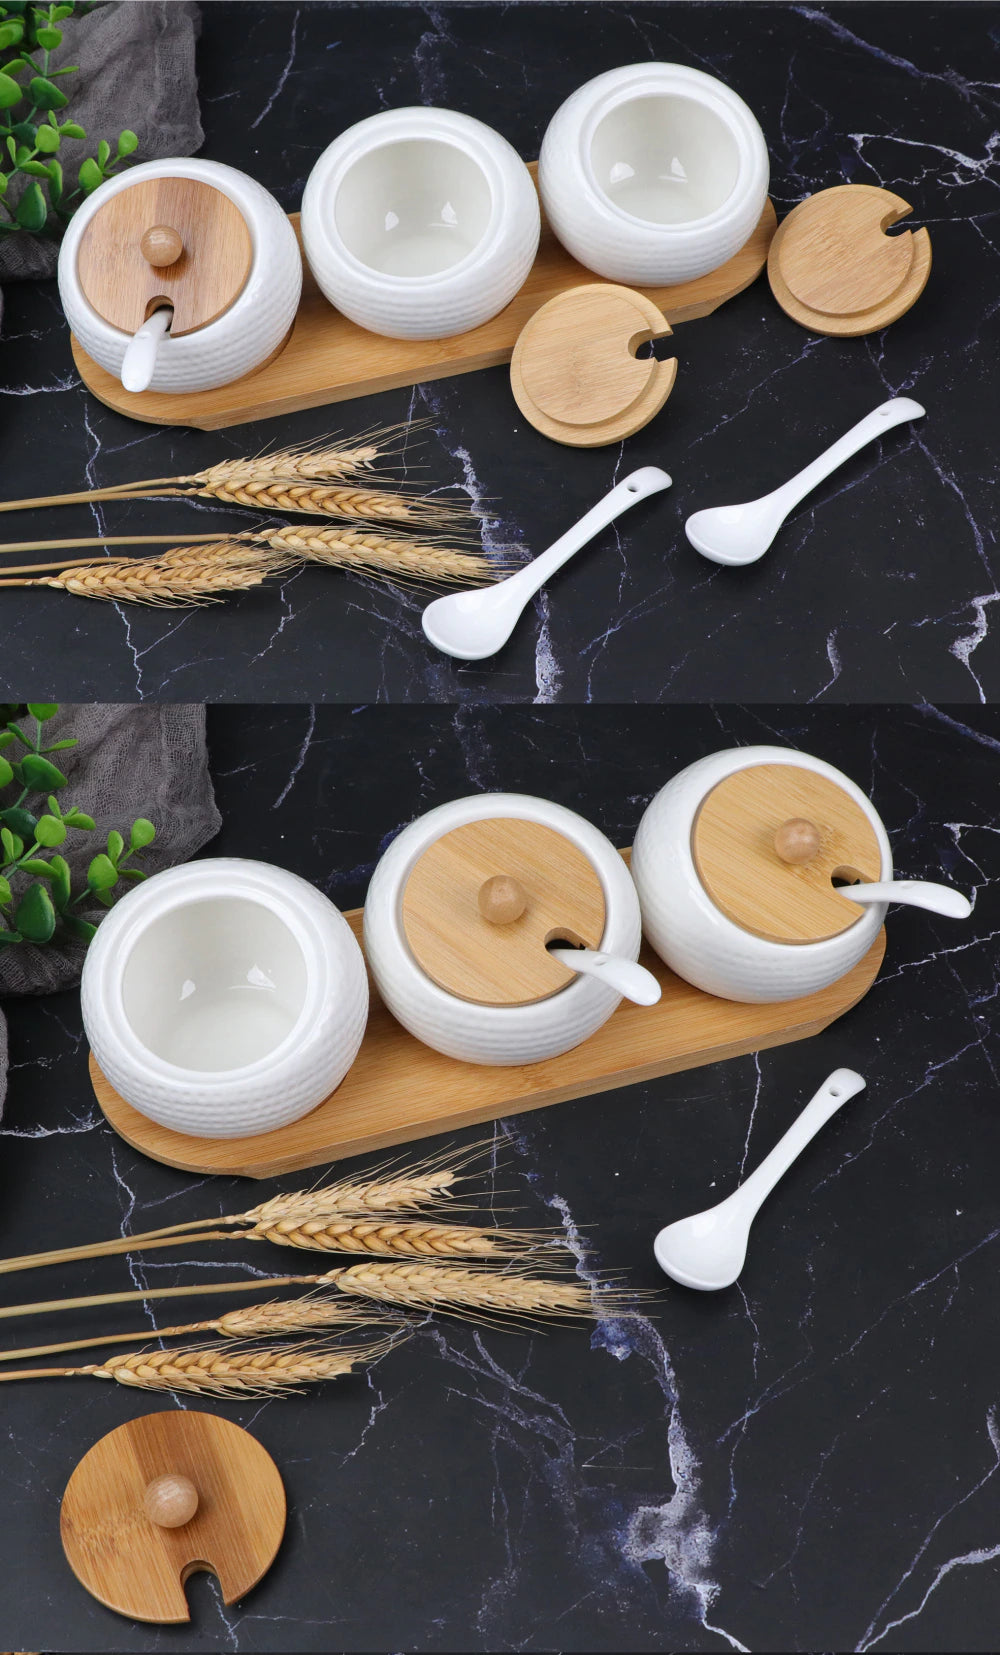 How Sweet - Condiment Jar with Ceramic Spoon